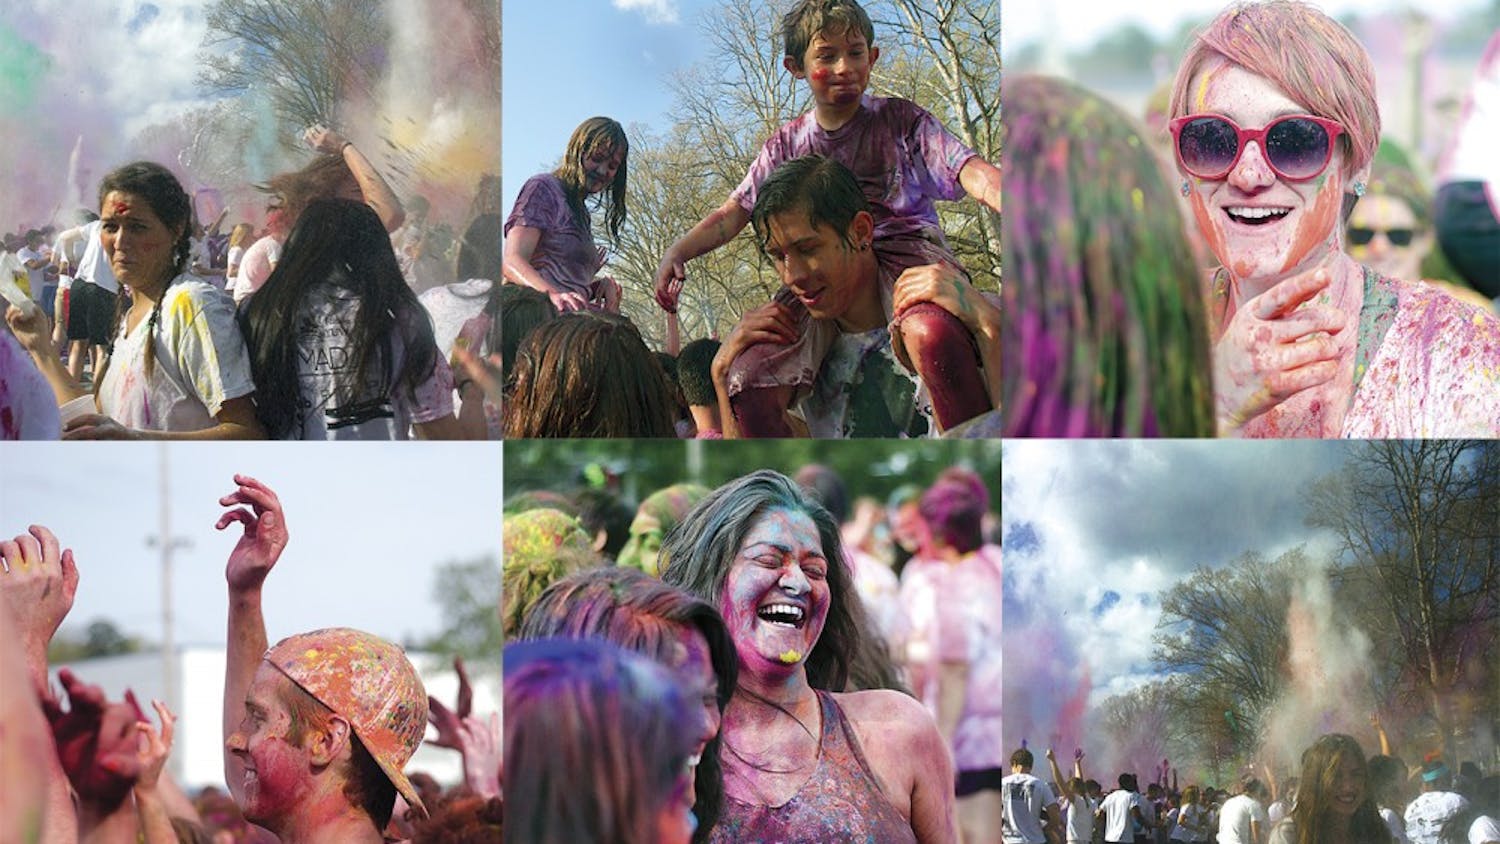 After it was handed over to the Campus Y, the University’s Holi Moli event began to draw a crowd of thousands.